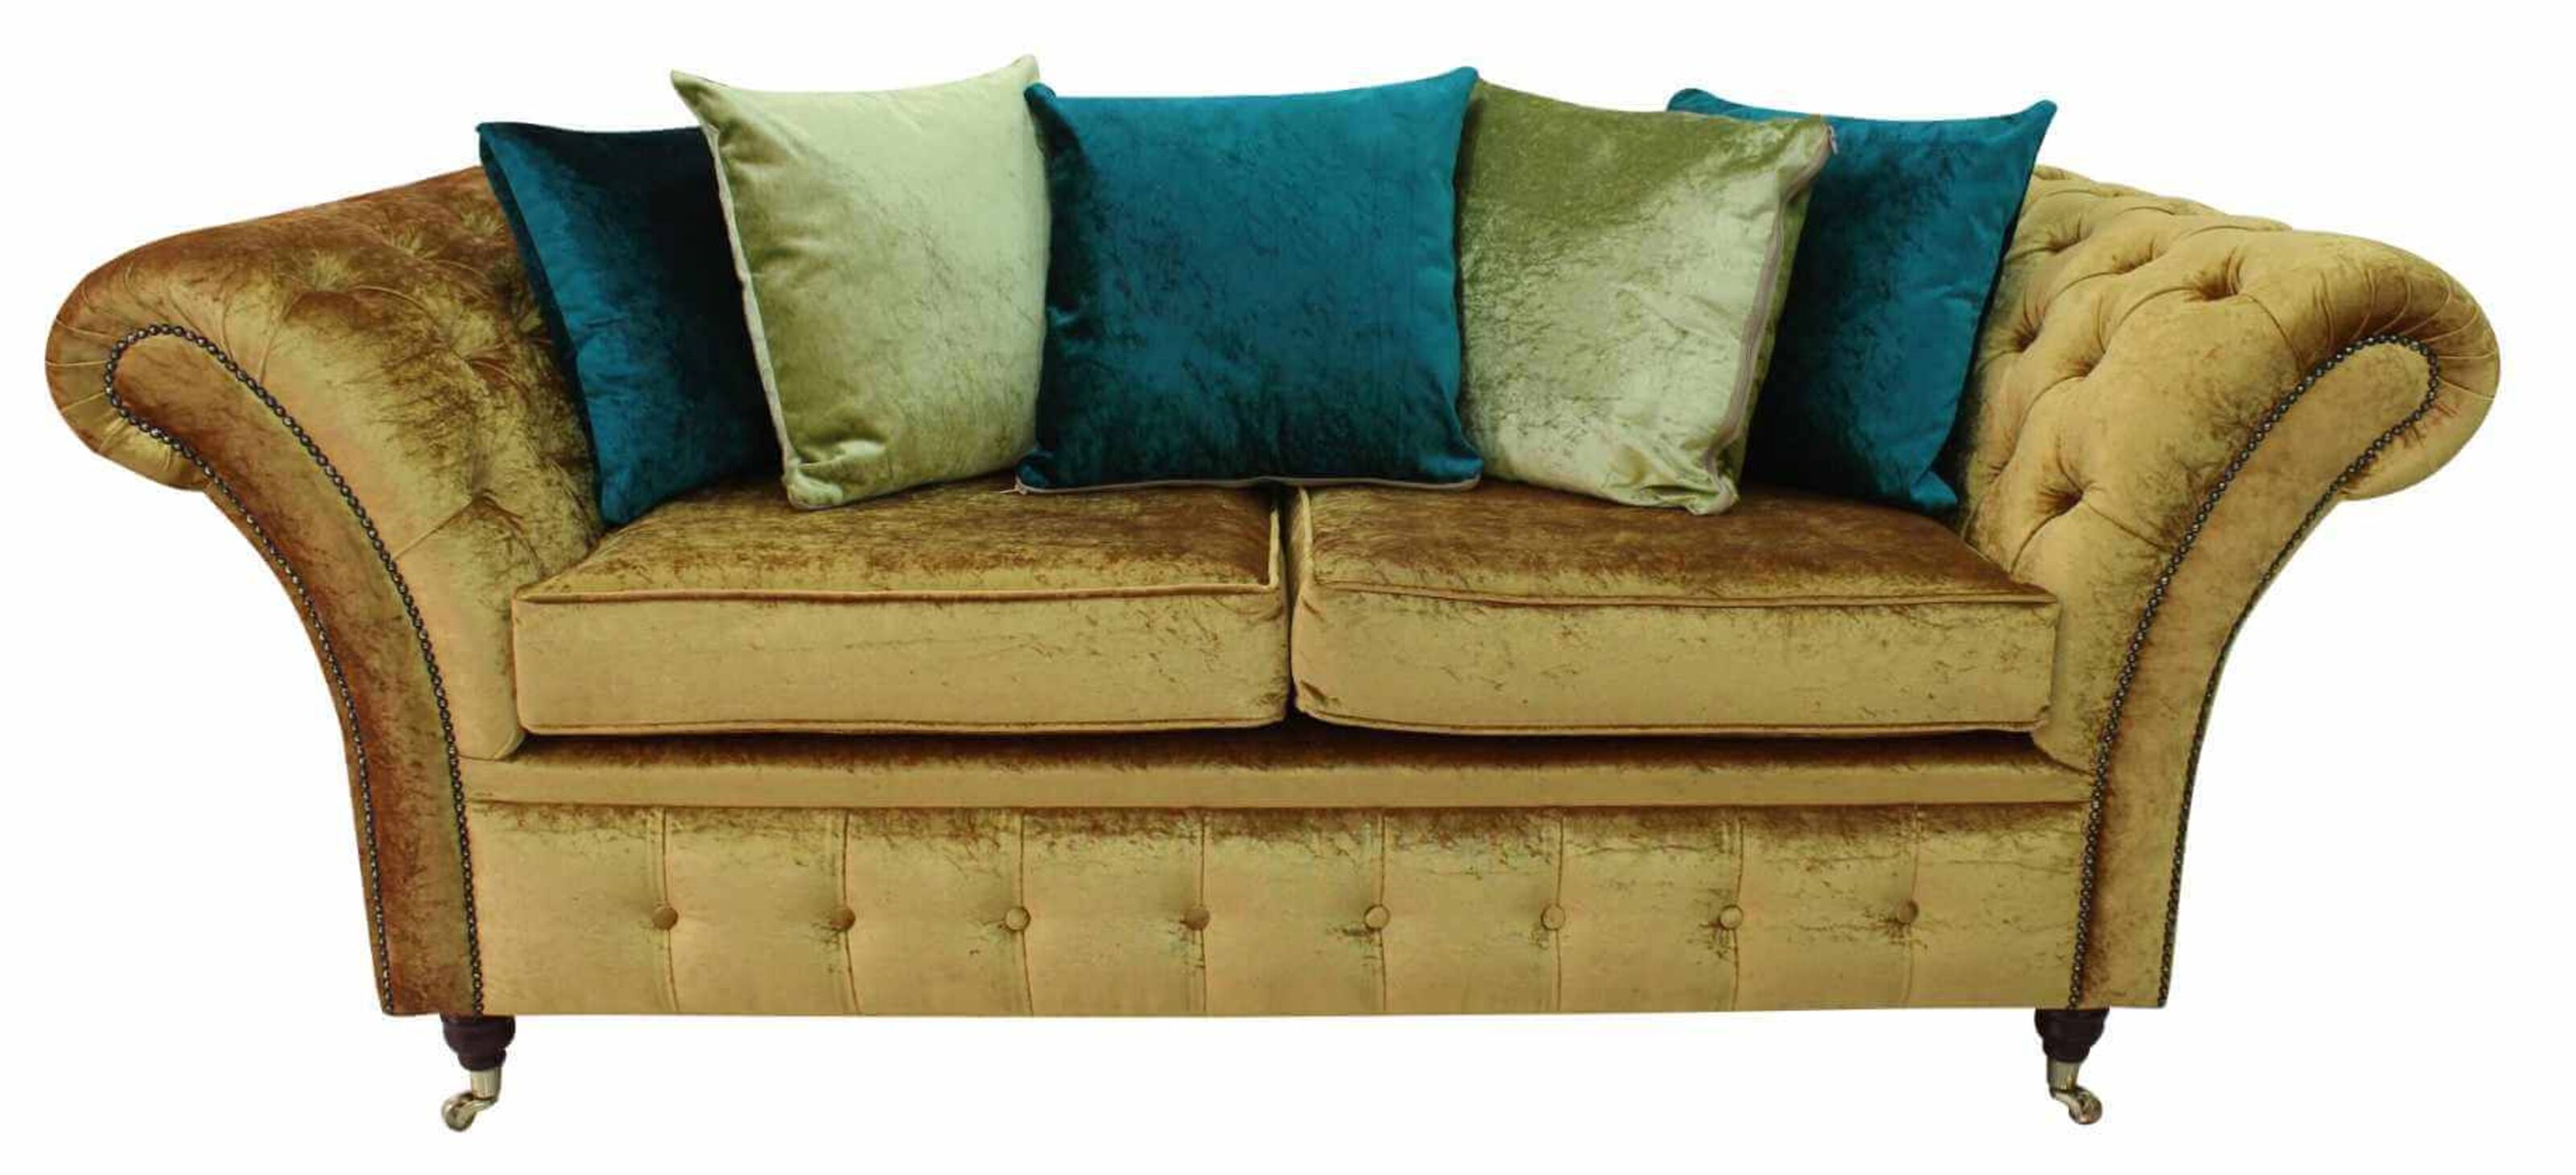 Plush Perfection Chesterfield Sofas with Accent Pillows  %Post Title